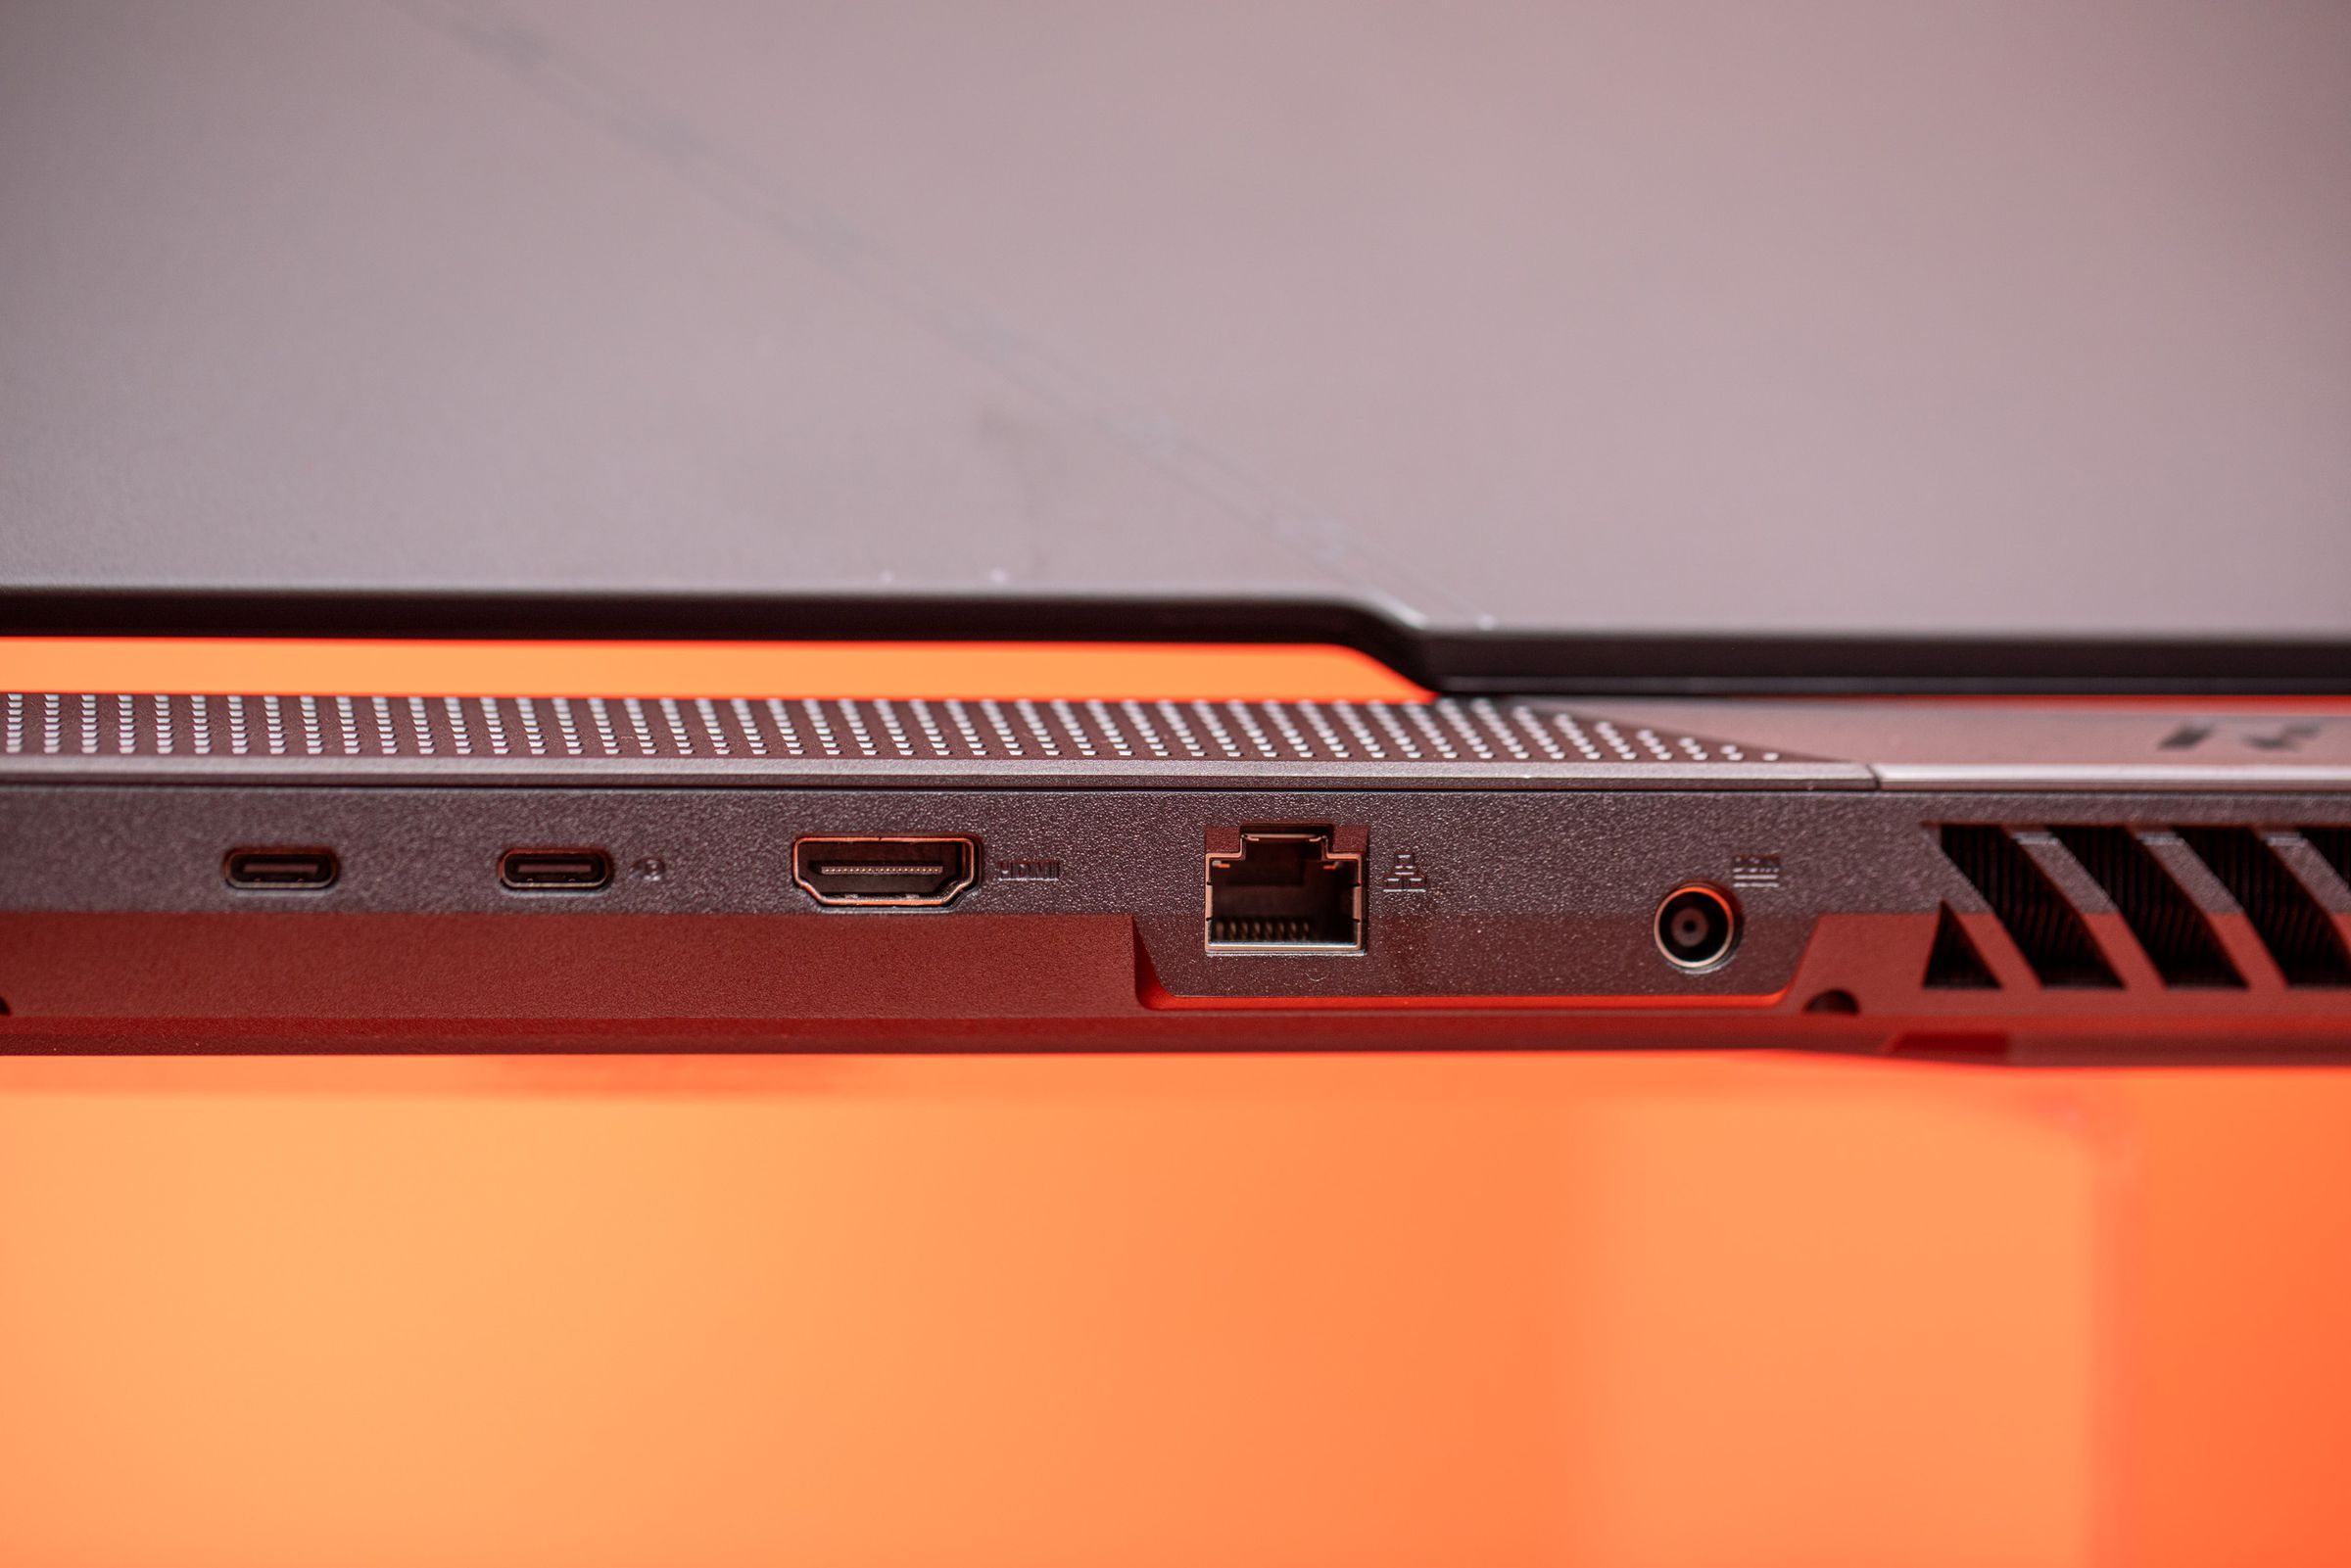 The ports on the back of the Asus ROG Strix Scar 17.